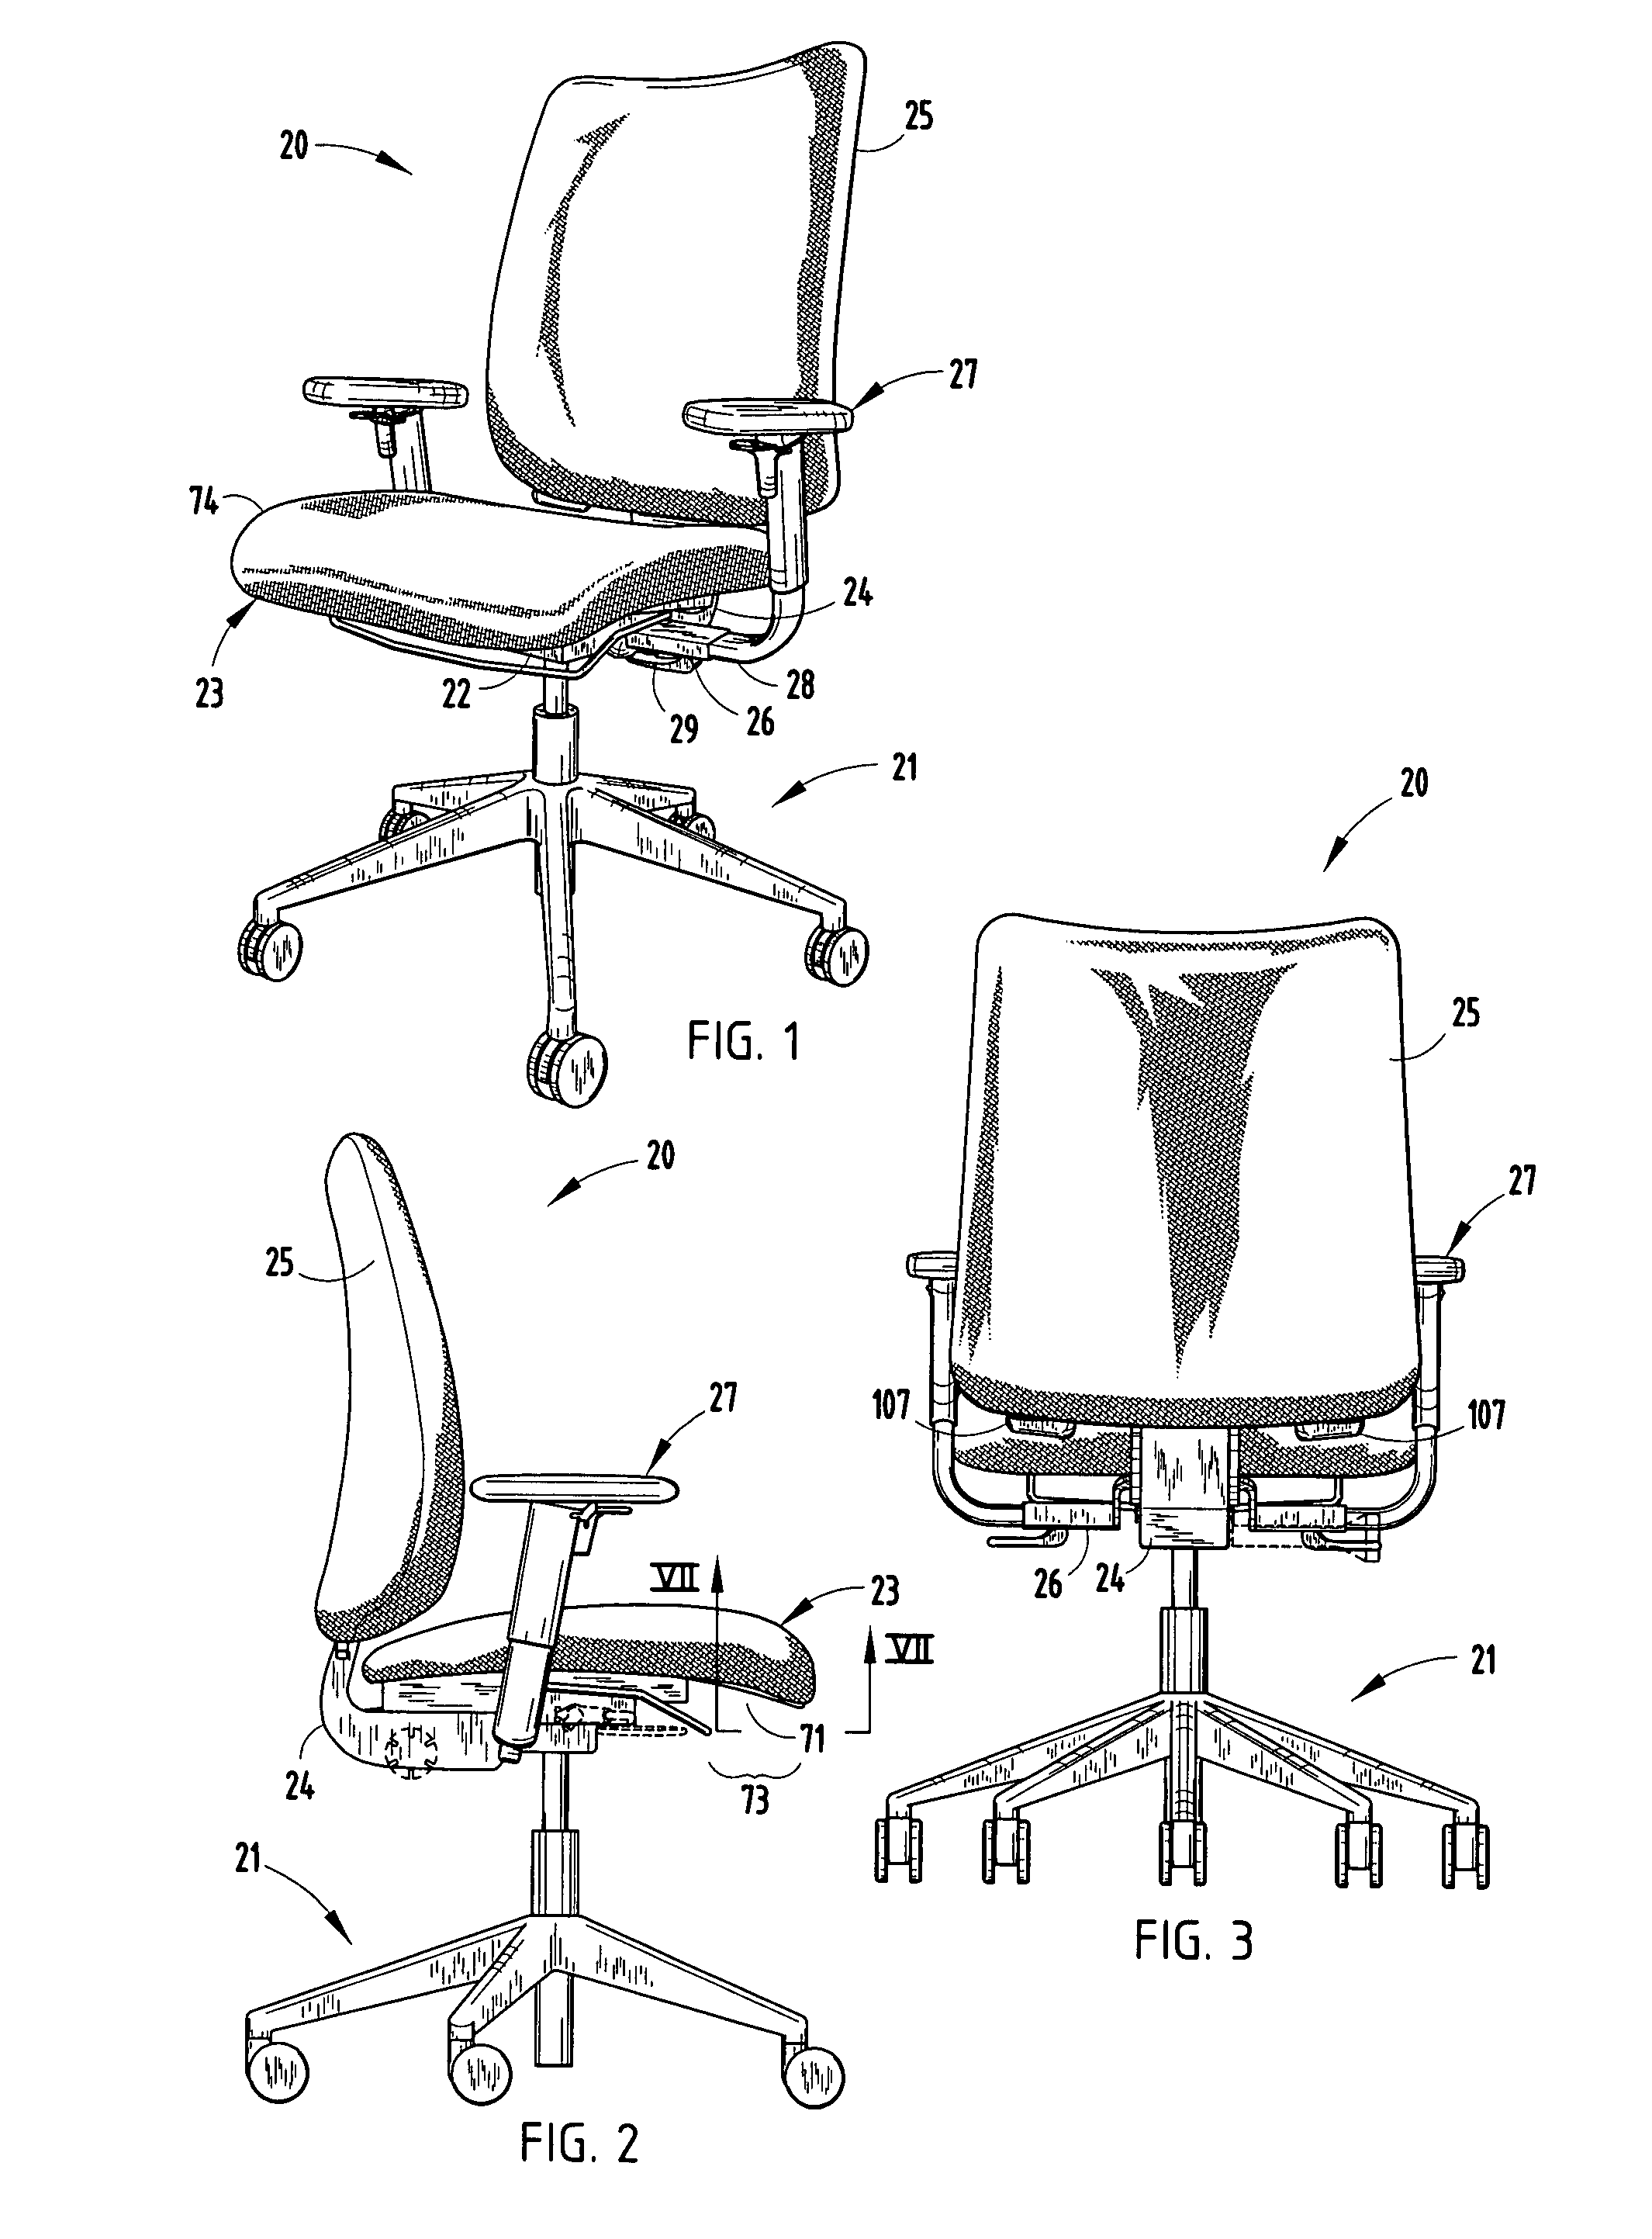 Seating unit with adjustable components